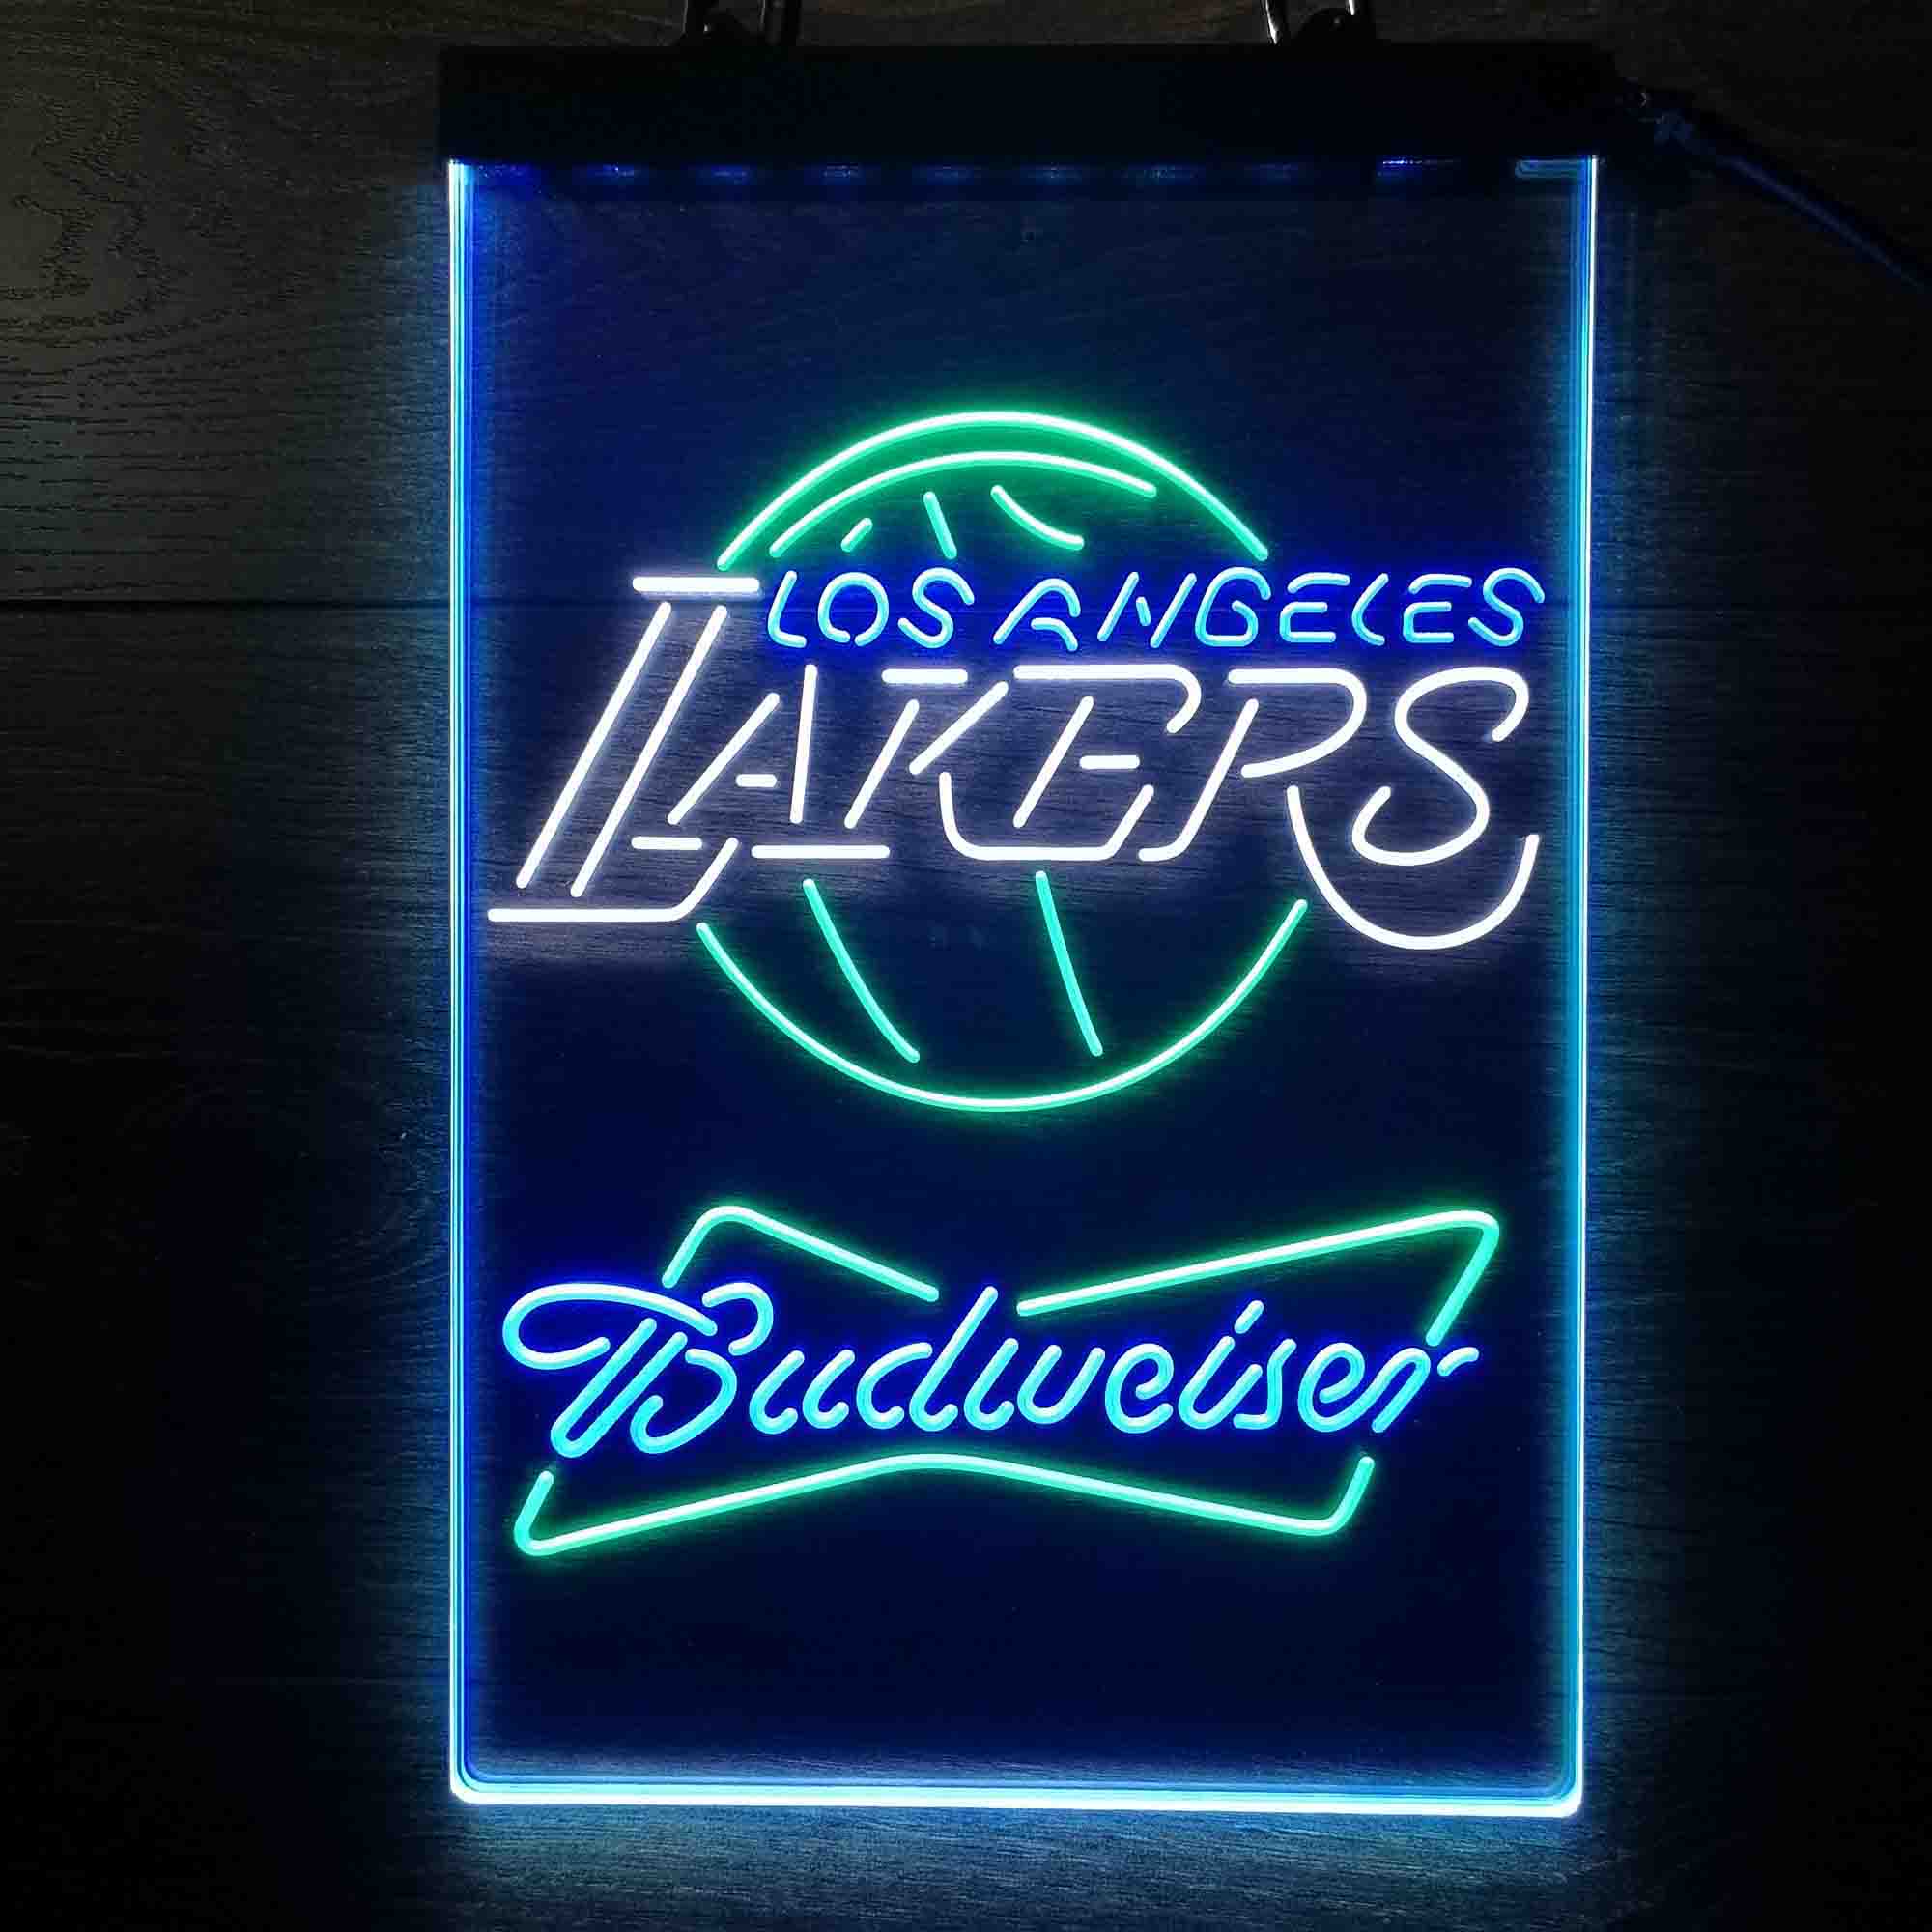 Los Angeles Lakers Nba Budweiser Neon LED Sign 3 Colors